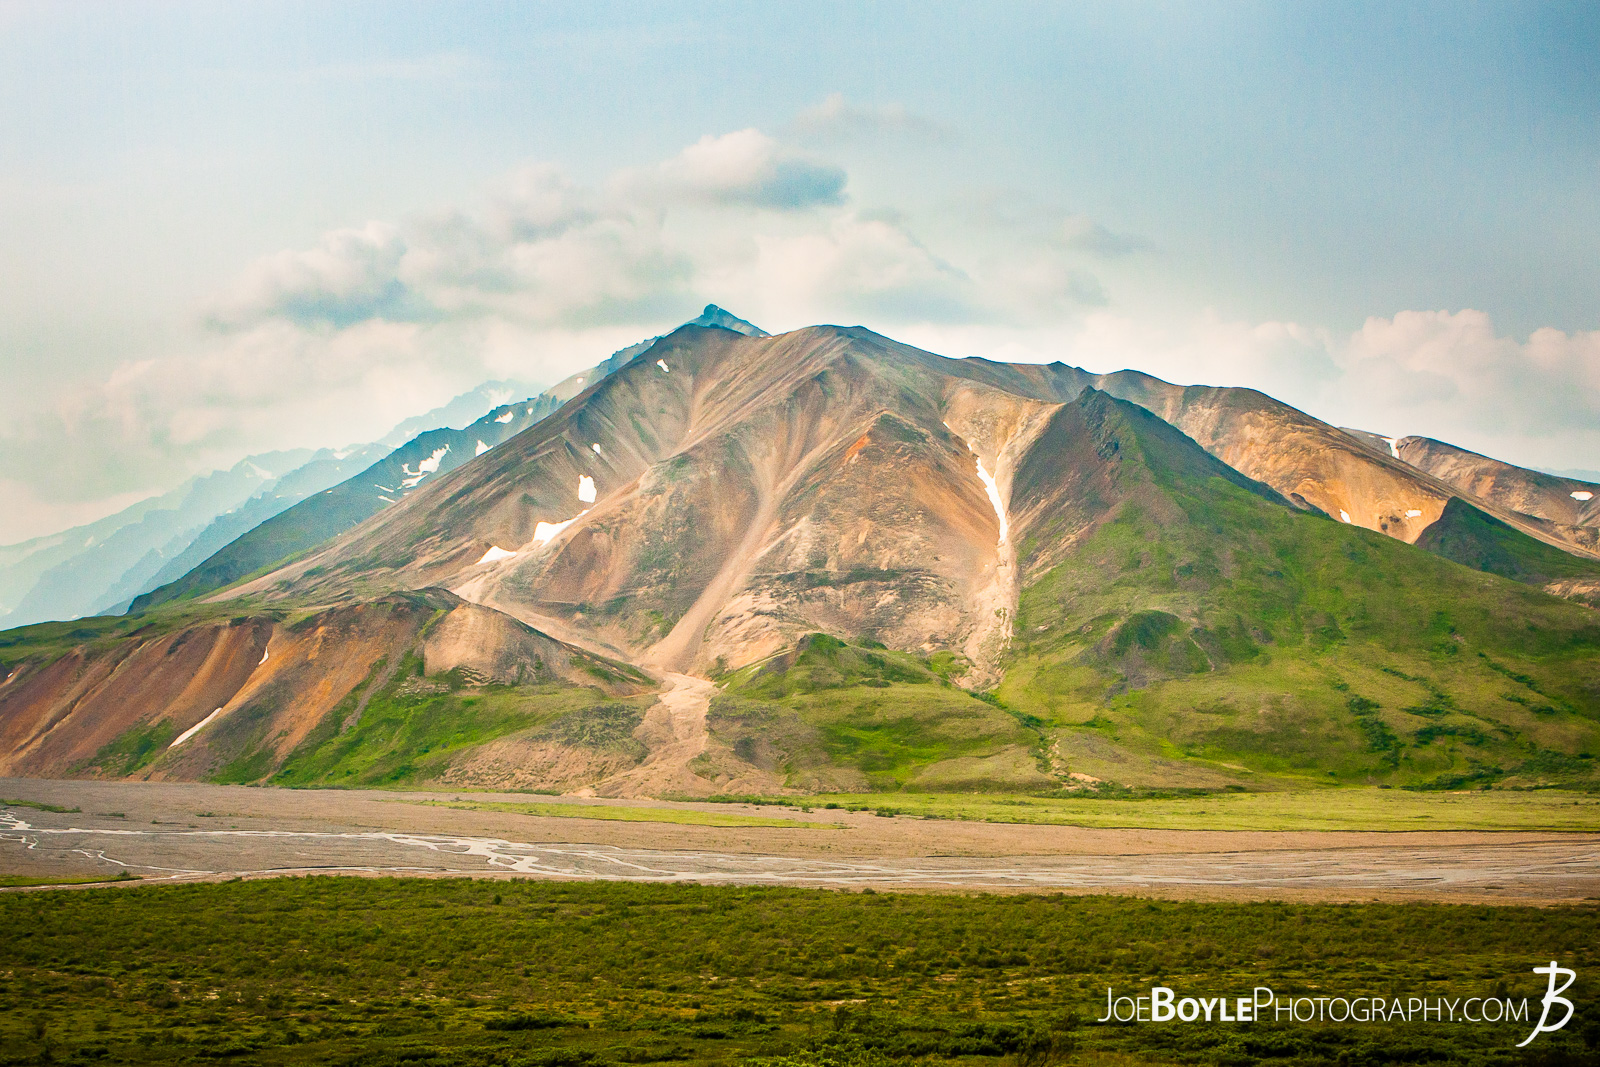  My friend Josh and I spent a considerable time in Alaska (about 3 weeks) and travelled to quite a few different parks in a short span of time. Here is a photo from within grid 6 looking out over grid 7 in Denali National Park. As you can see Alaska has some beautiful mountains and flowing rivers. There was a glacier at the start of the river that we tried to get to but ran out of time! Traversing the Alaska, untrailed, terrain took us much longer than we thought! 